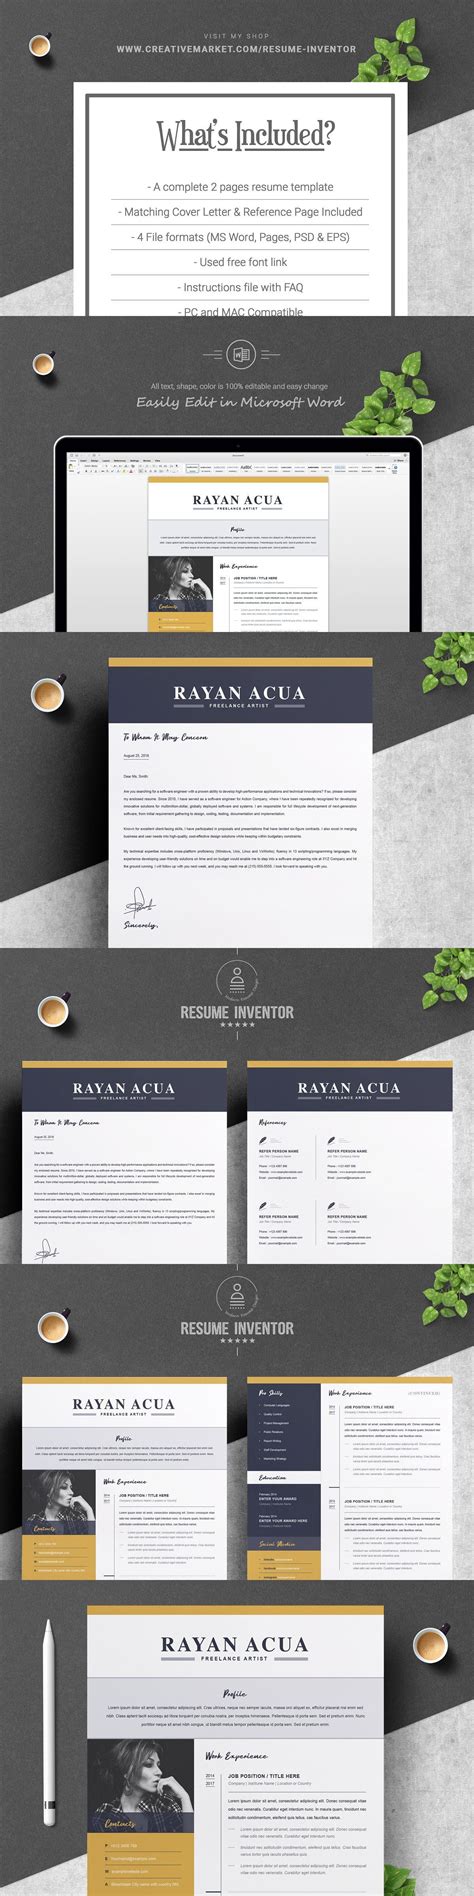 Professional Resume Template | Resume template professional, Resume template, Professional resume